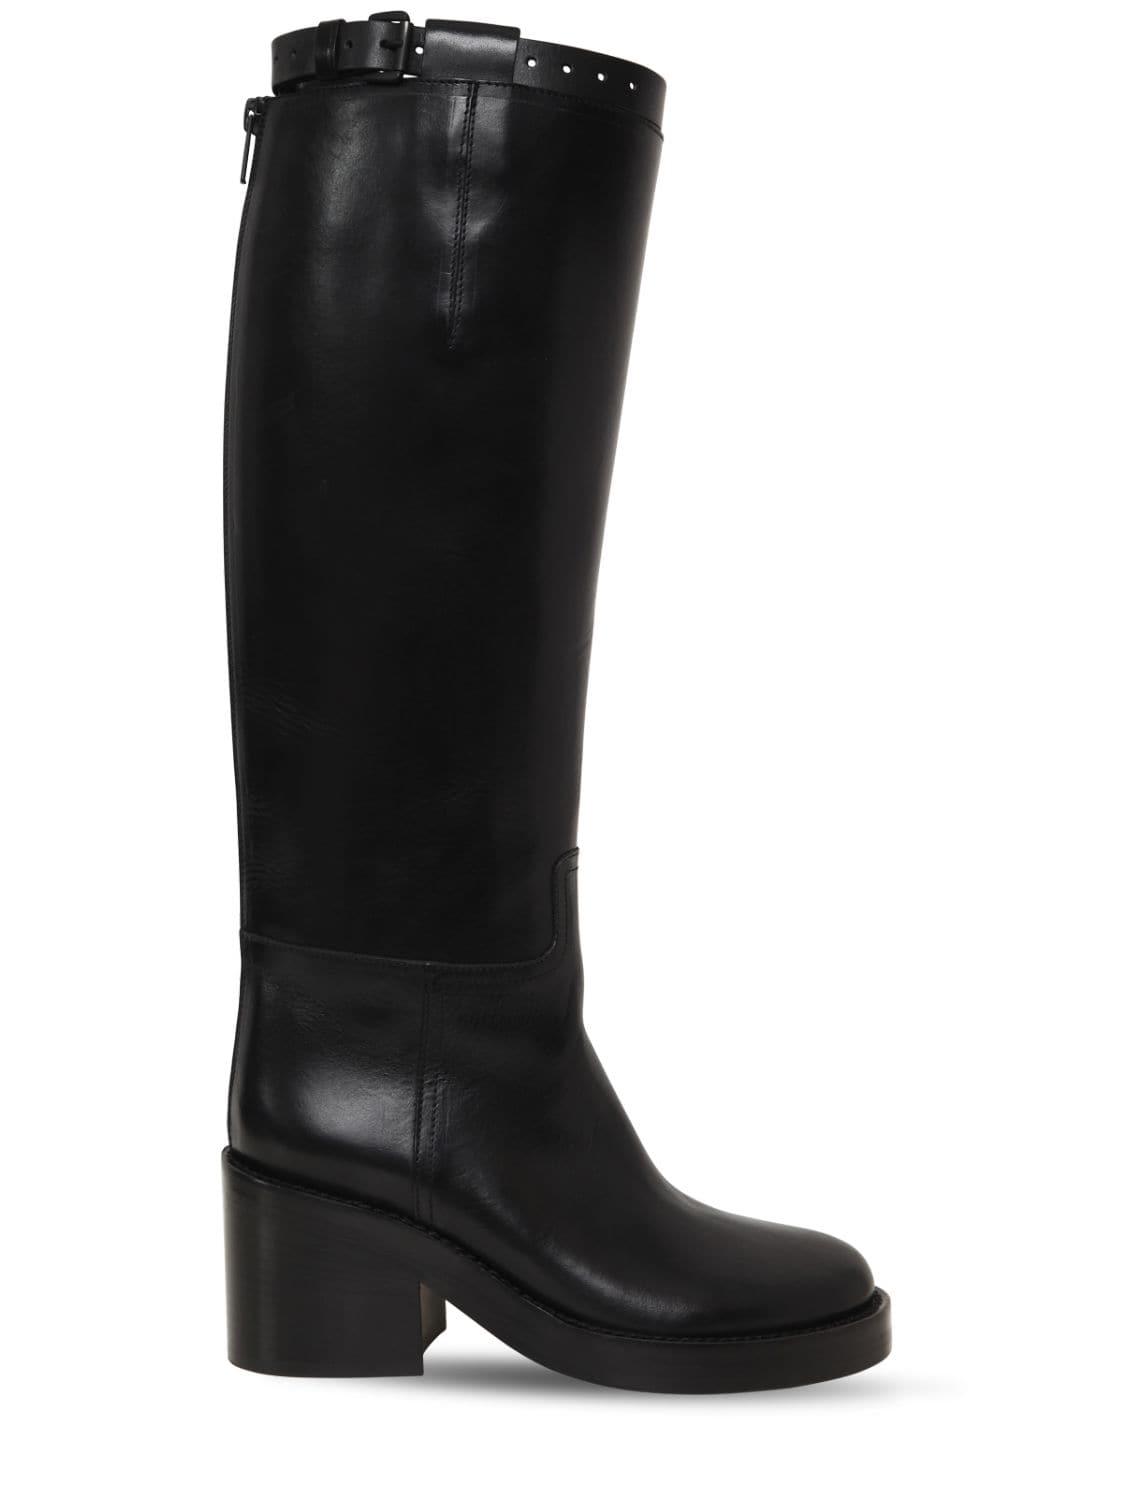 Ann Demeulemeester 75mm Brushed Leather Riding Boots in Black - Lyst